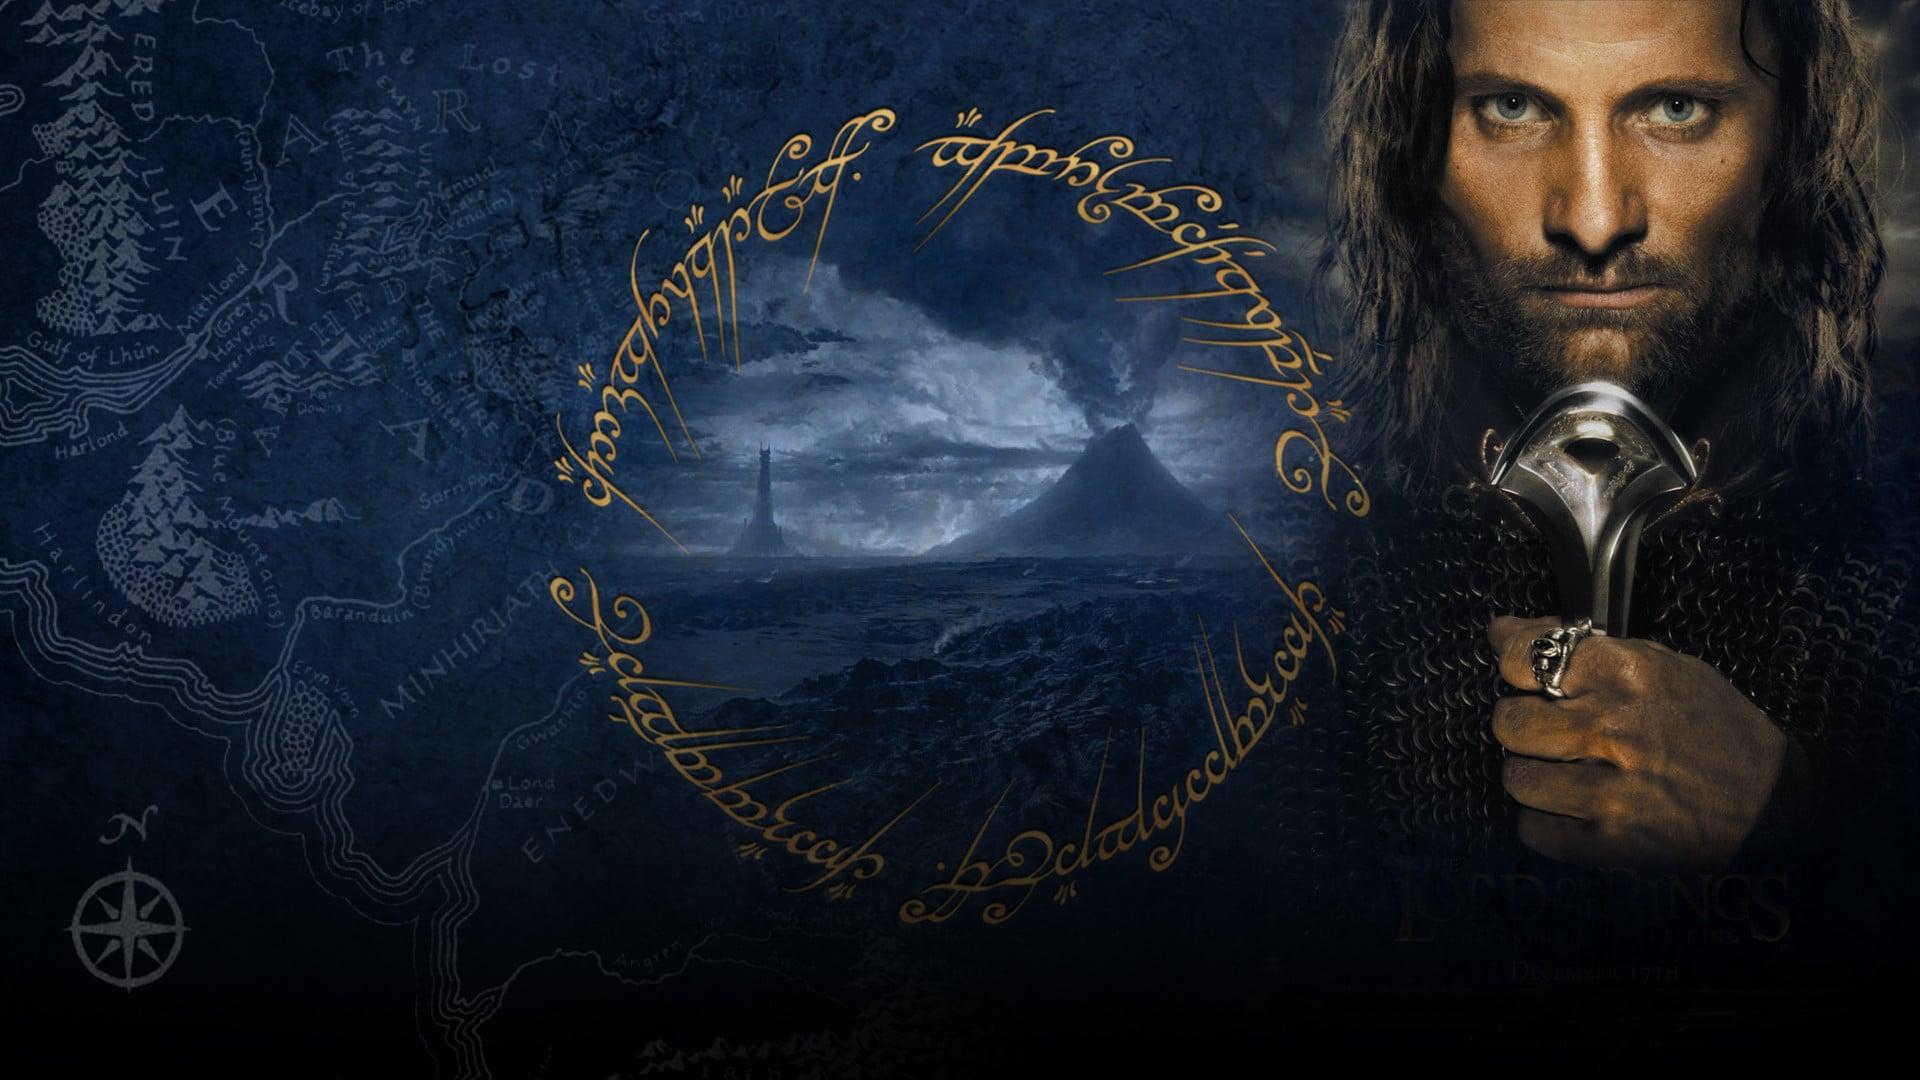 Backdrop Image for The Lord of the Rings: The Return of the King